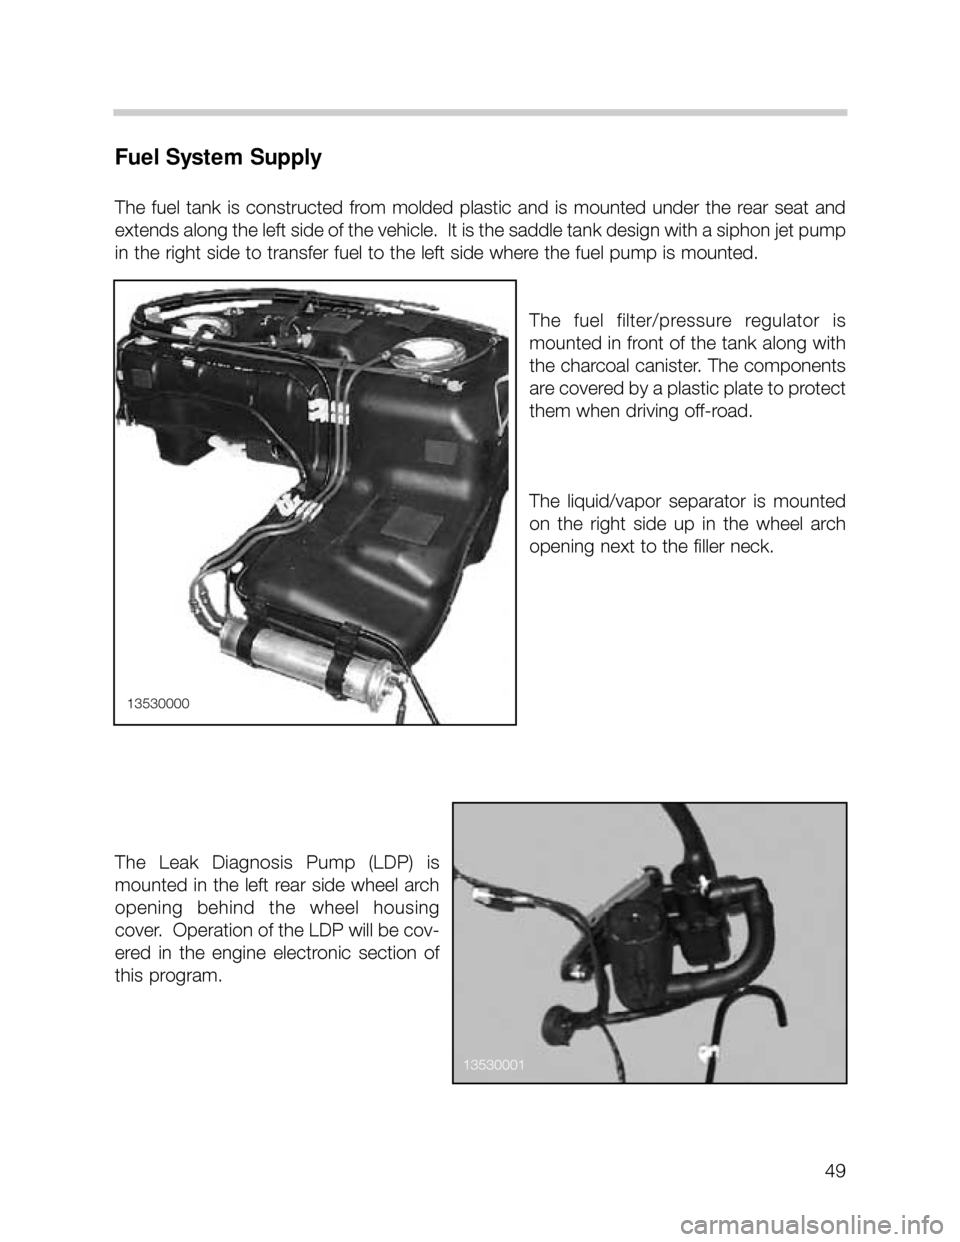 BMW X5 2001 E53 Service Manual 49
Fuel System Supply
The  fuel  tank  is  constructed  from  molded  plastic  and  is  mounted  under  the  rear  seat  and
extends along the left side of the vehicle.  It is the saddle tank design w